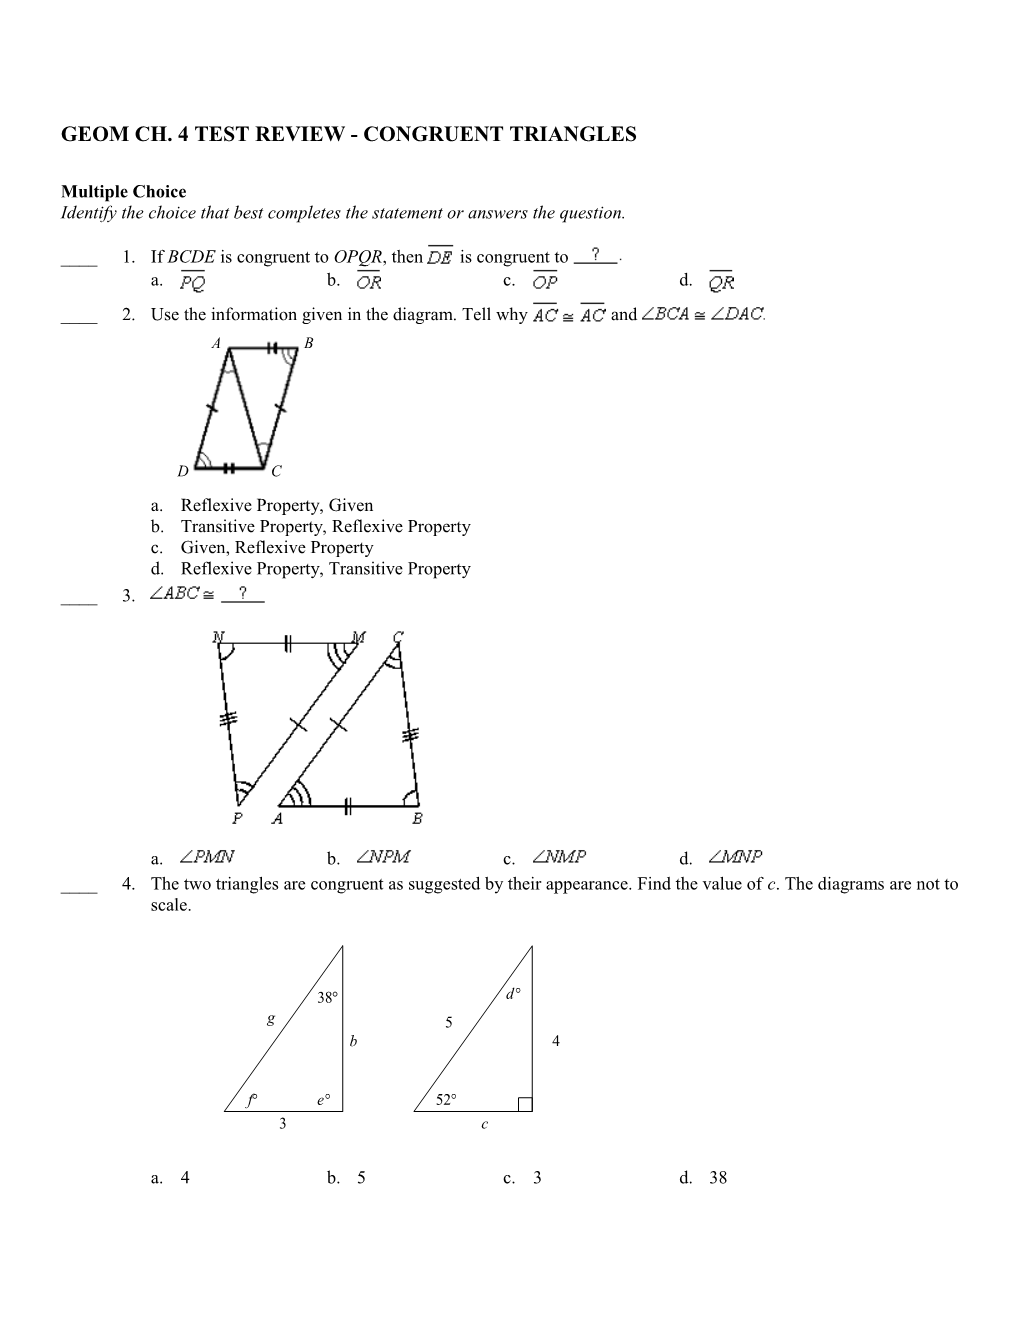 Geom Ch. 4 Test Review - Congruent Triangles